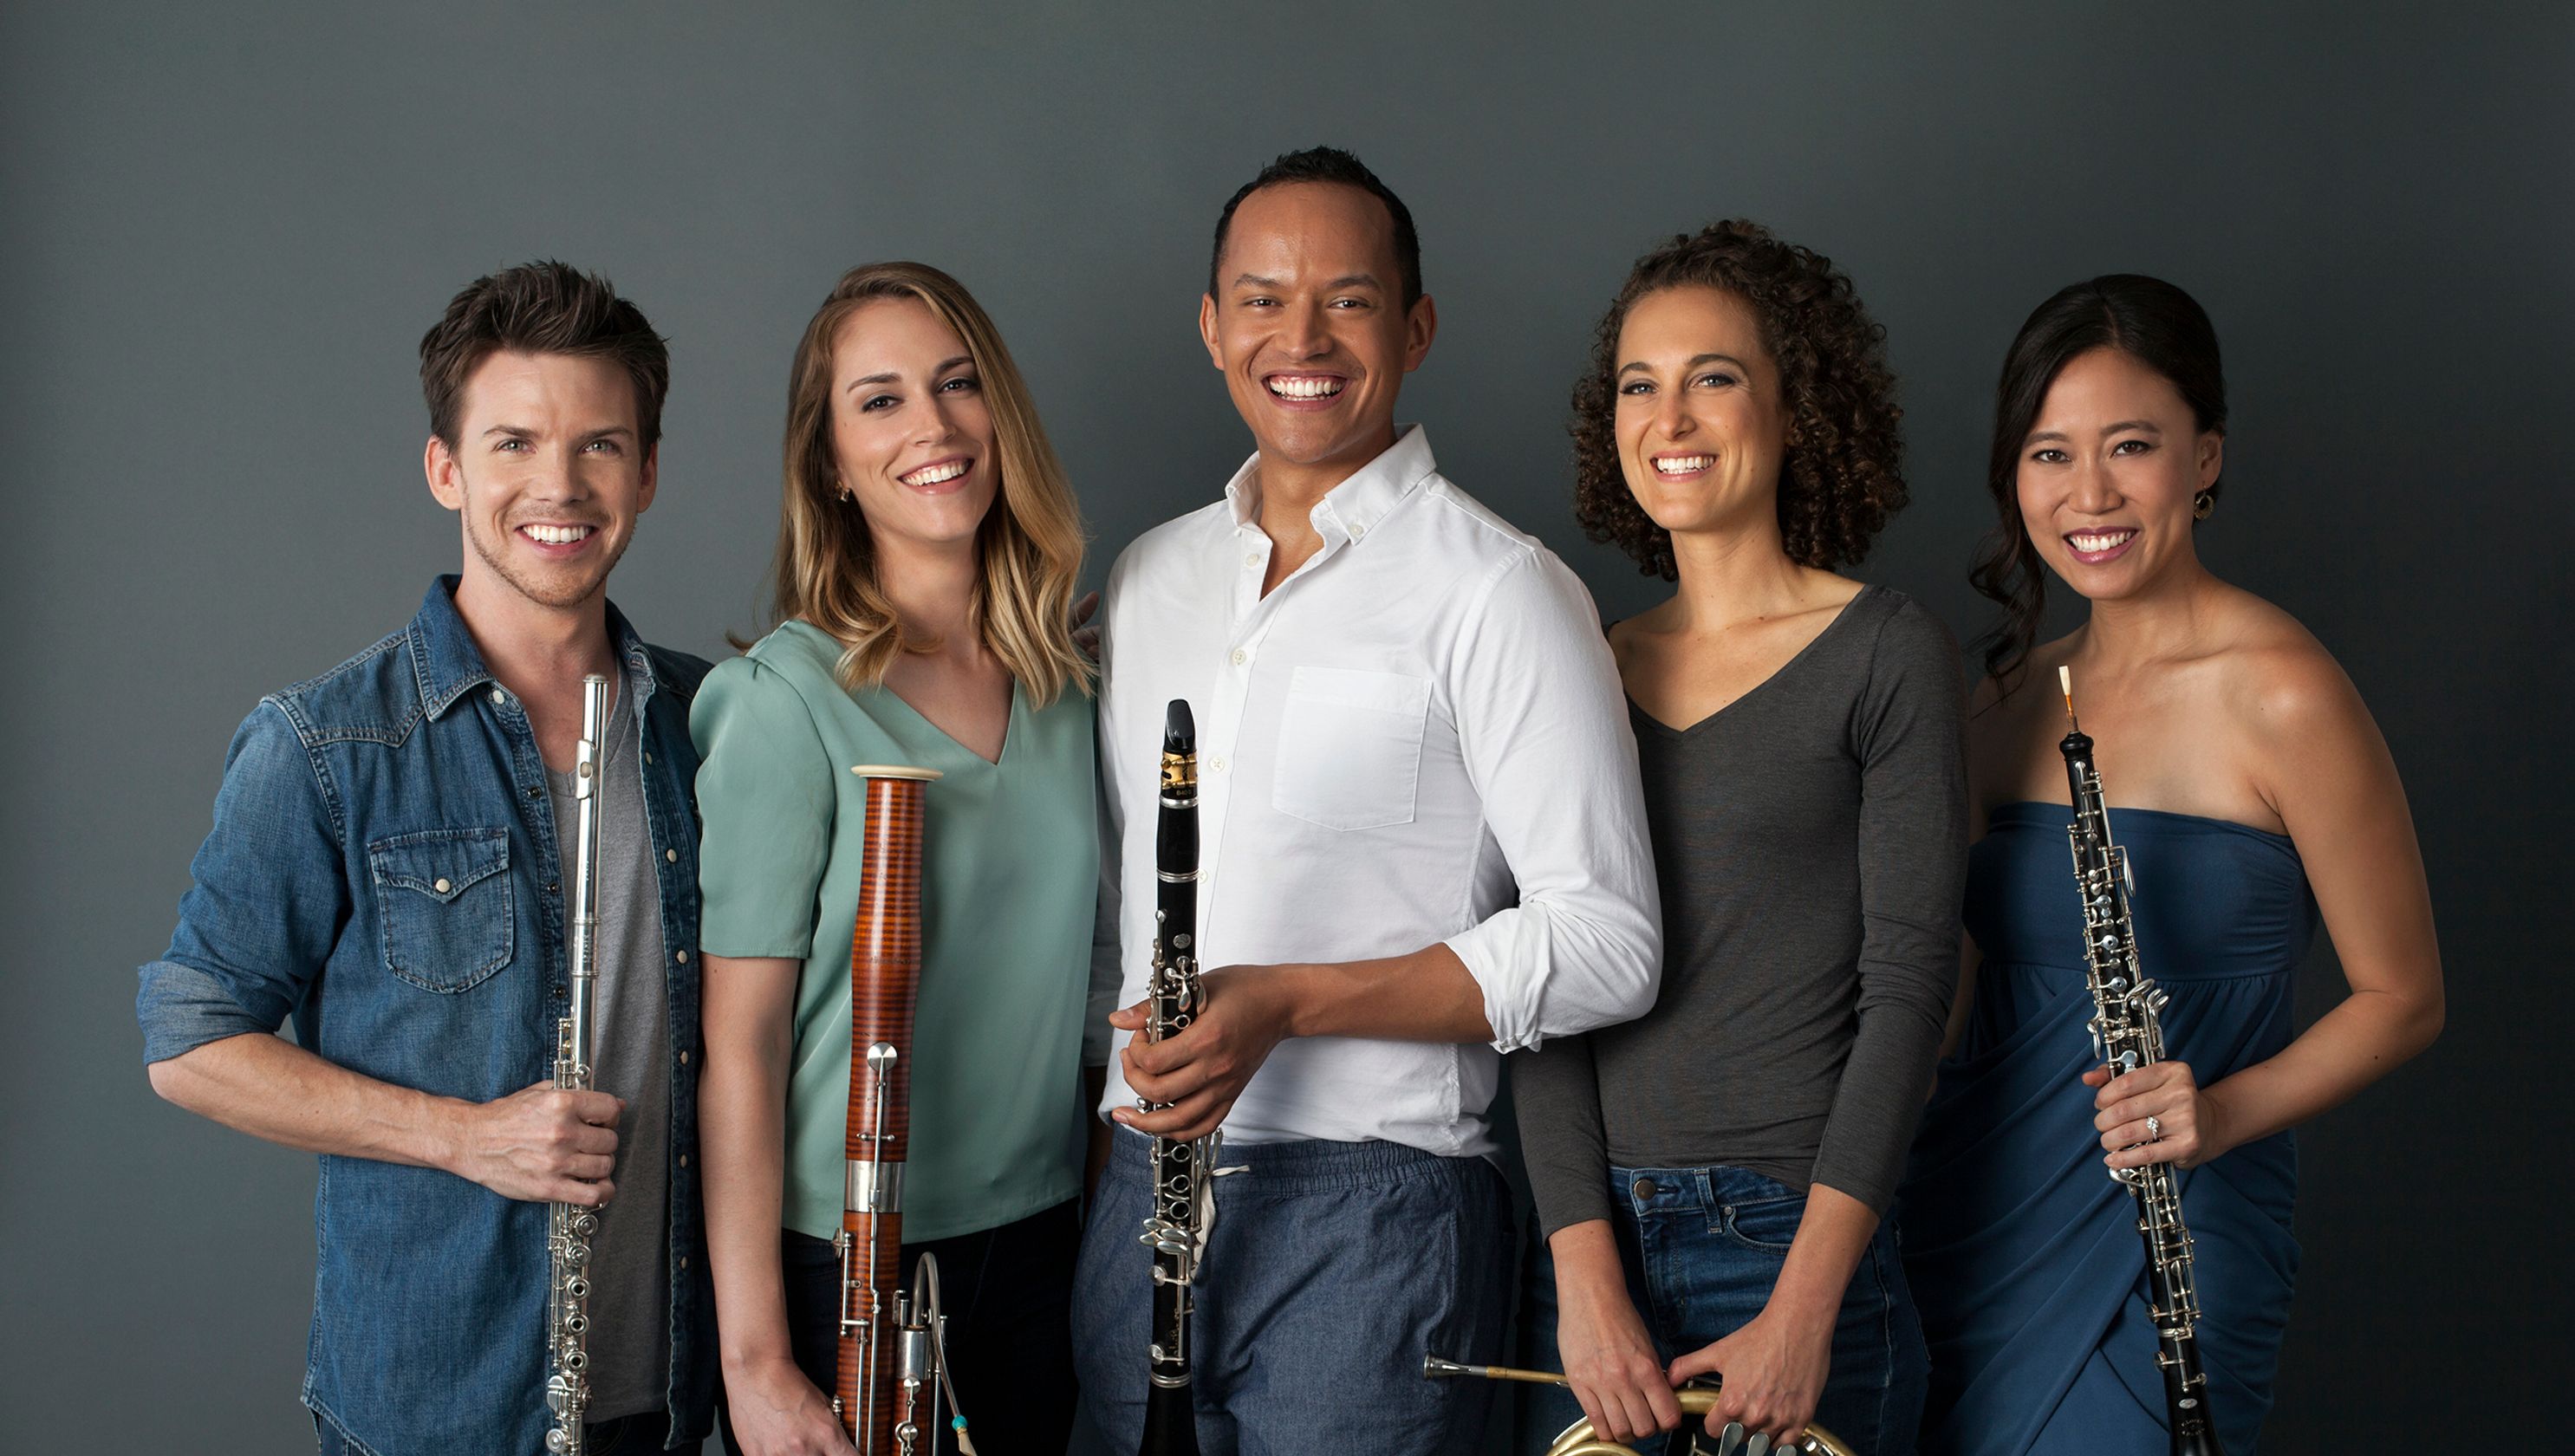 WindSync quintet concert Feb. 22 at The Warehouse at Alley Station